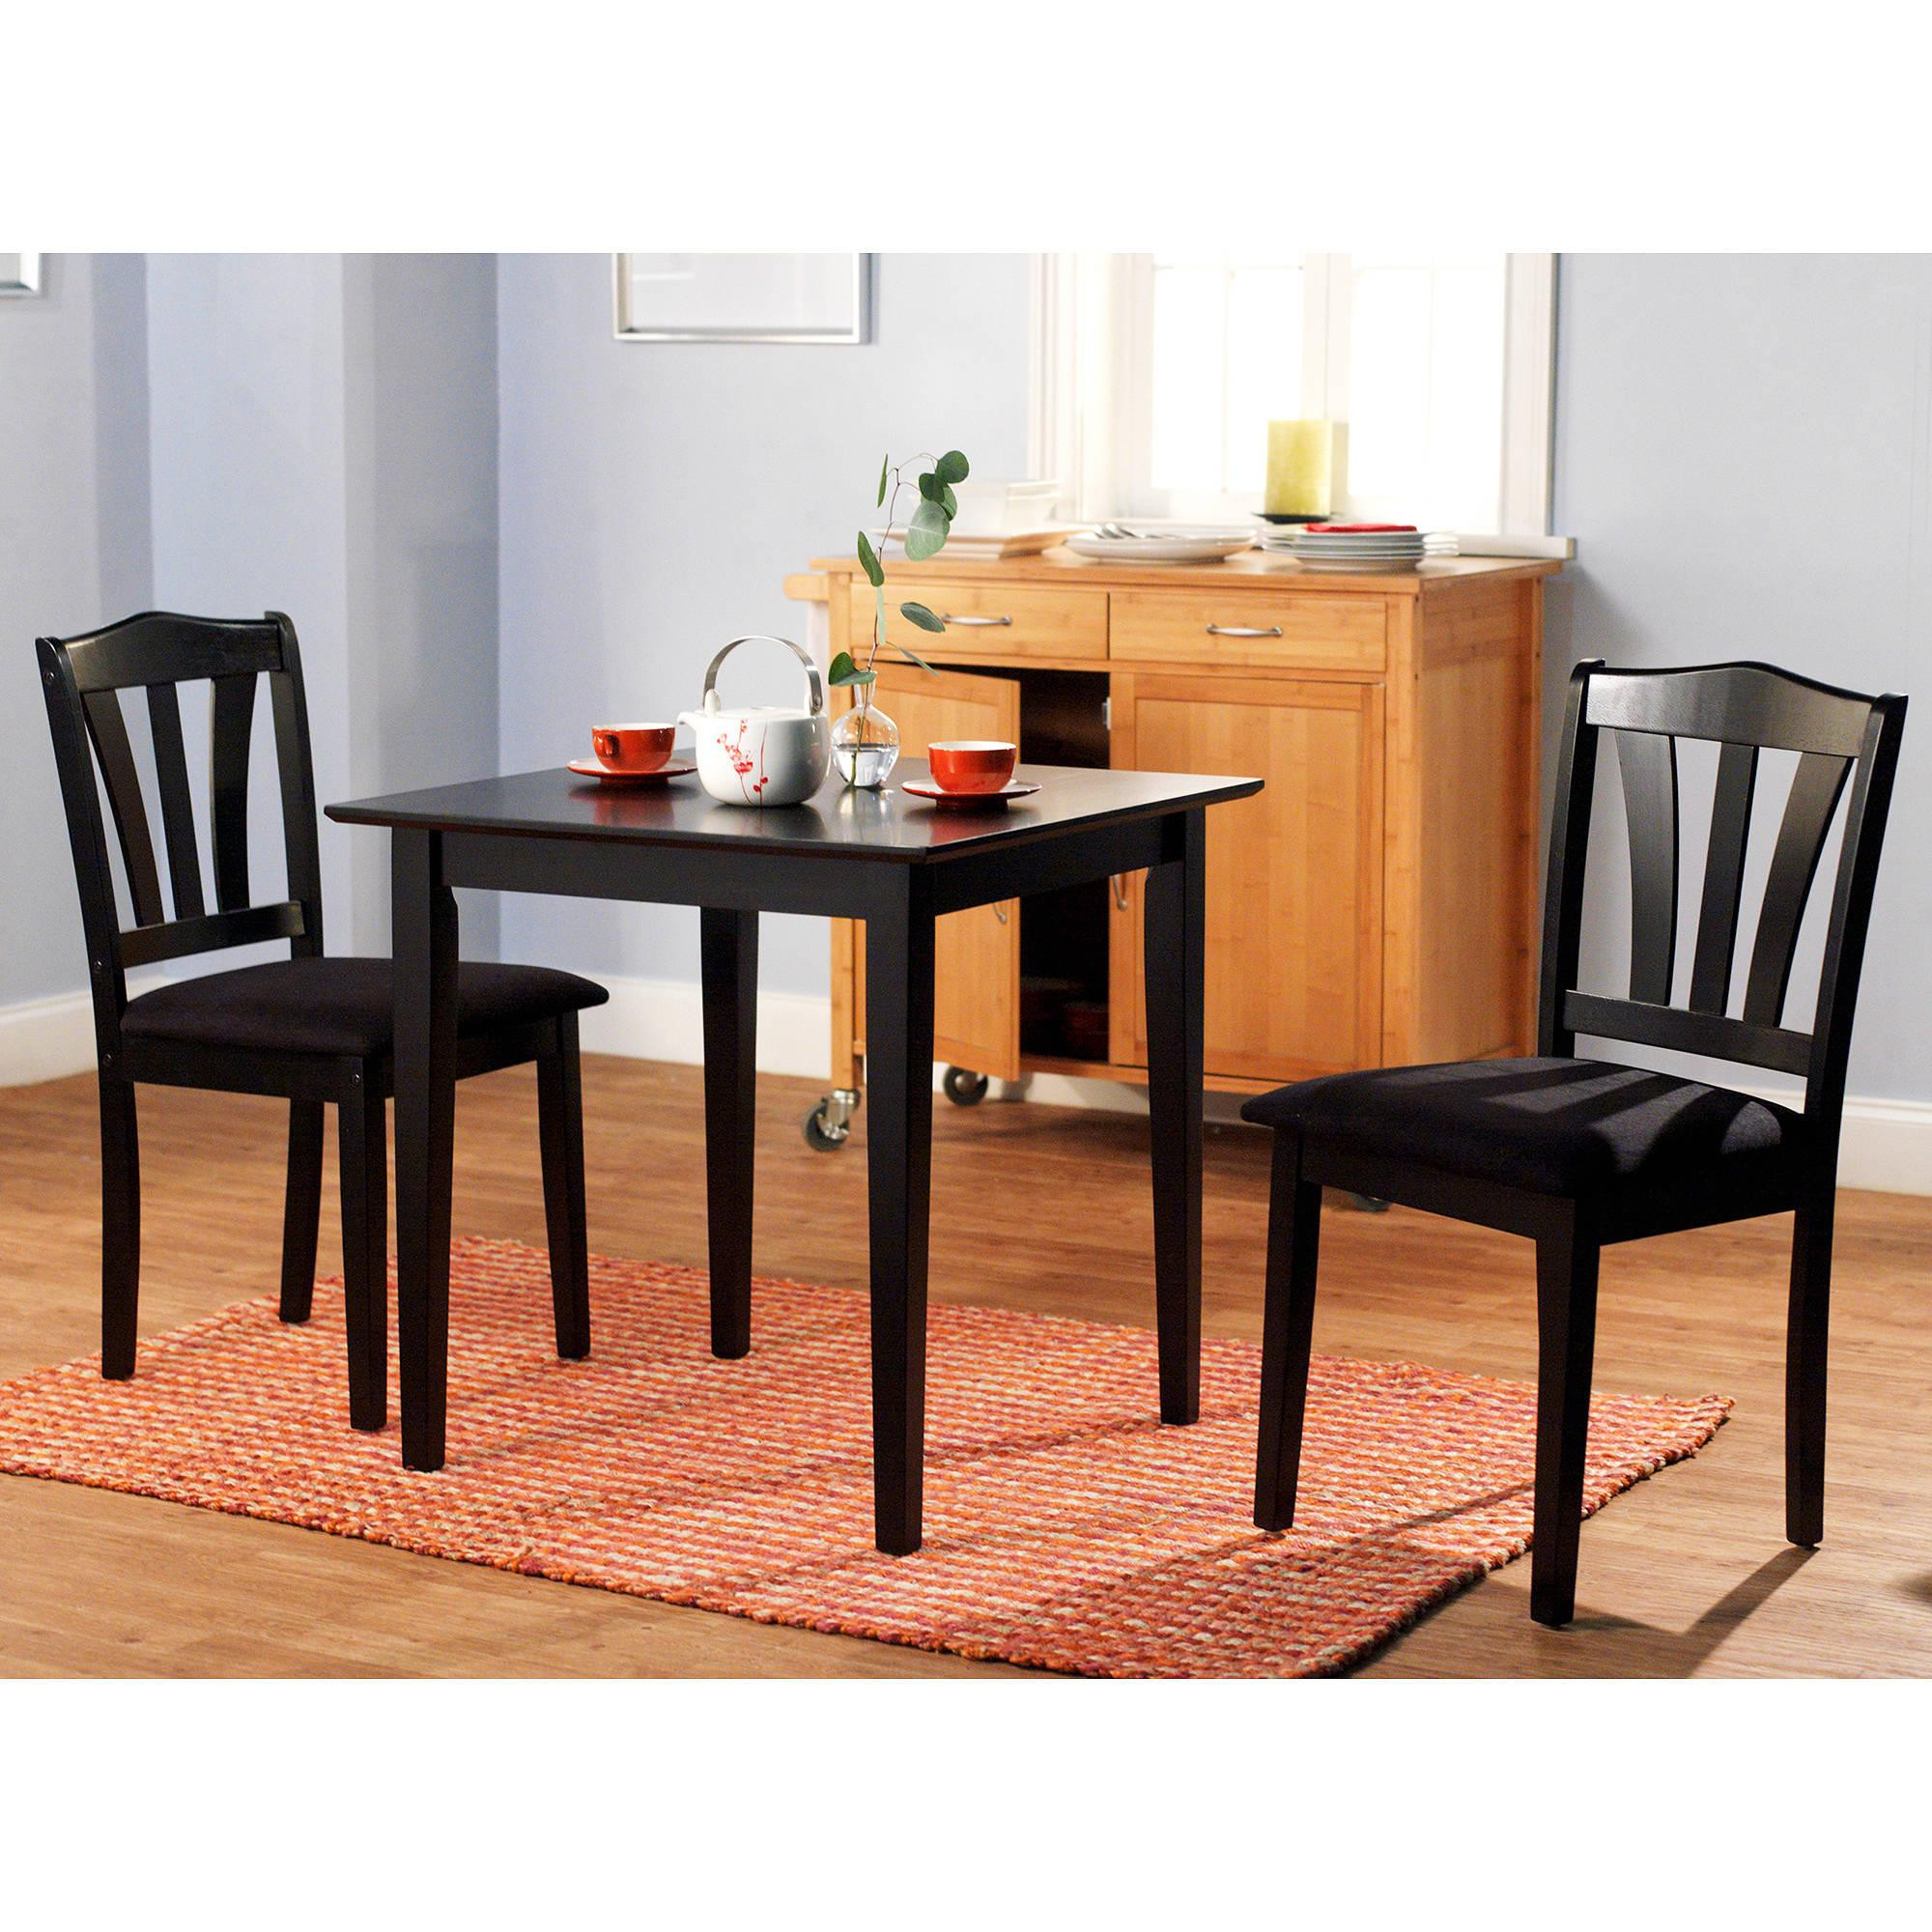 Dinette Set For Small Kitchen
 3 Piece Dining Set Table 2 Chairs Kitchen Room Wood